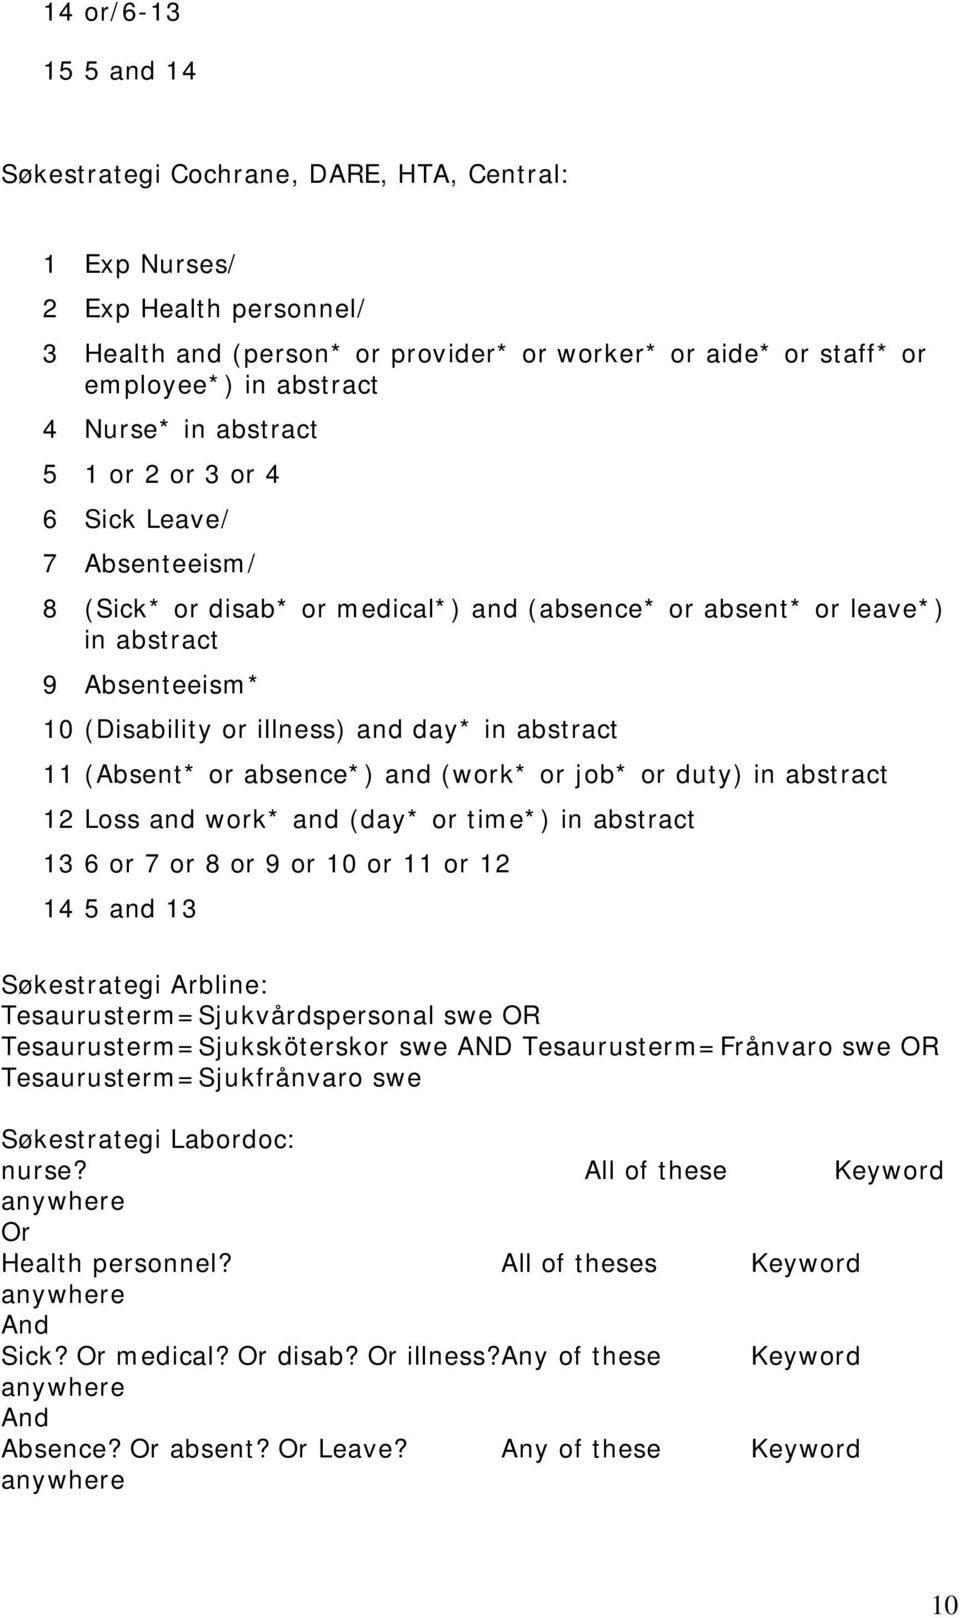 in abstract 11 (Absent* or absence*) and (work* or job* or duty) in abstract 12 Loss and work* and (day* or time*) in abstract 13 6 or 7 or 8 or 9 or 10 or 11 or 12 14 5 and 13 Søkestrategi Arbline: